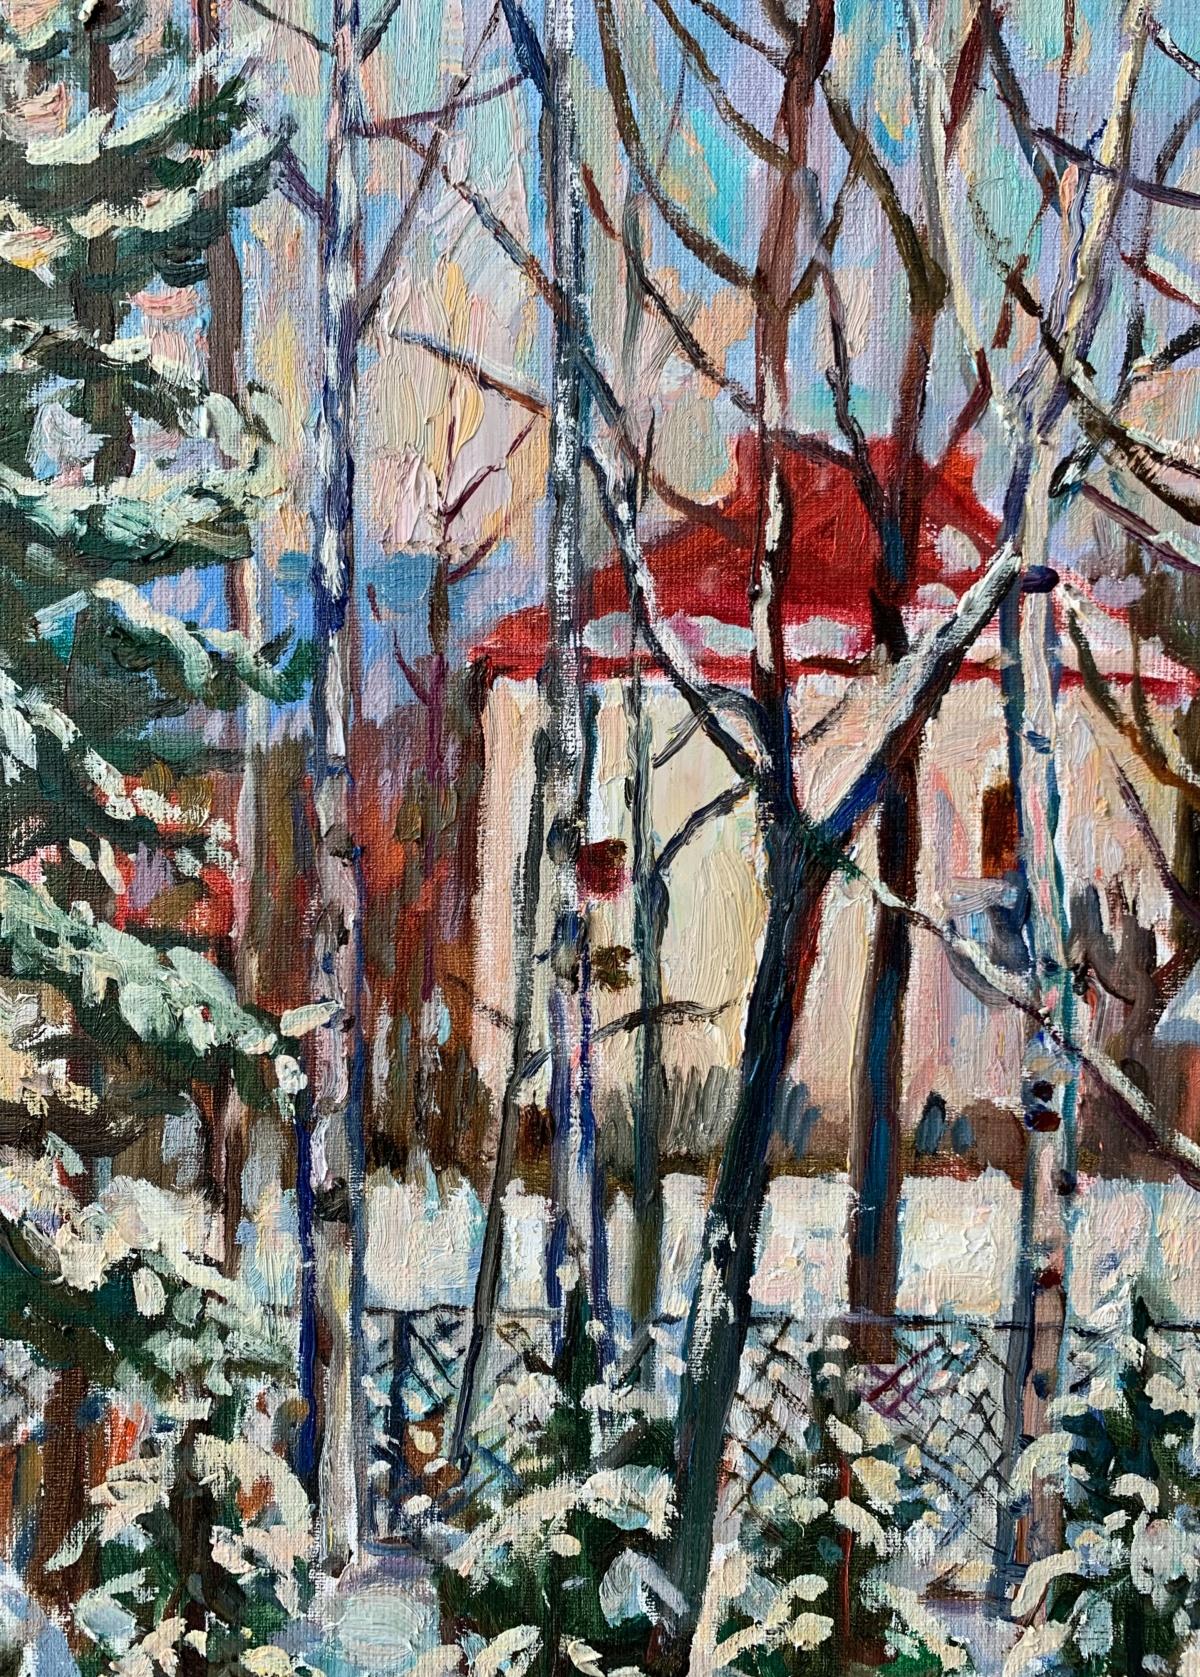 In the winter sun - Oil painting, Colourful, Vertcal, Trees - Other Art Style Painting by Marek Niedojadło